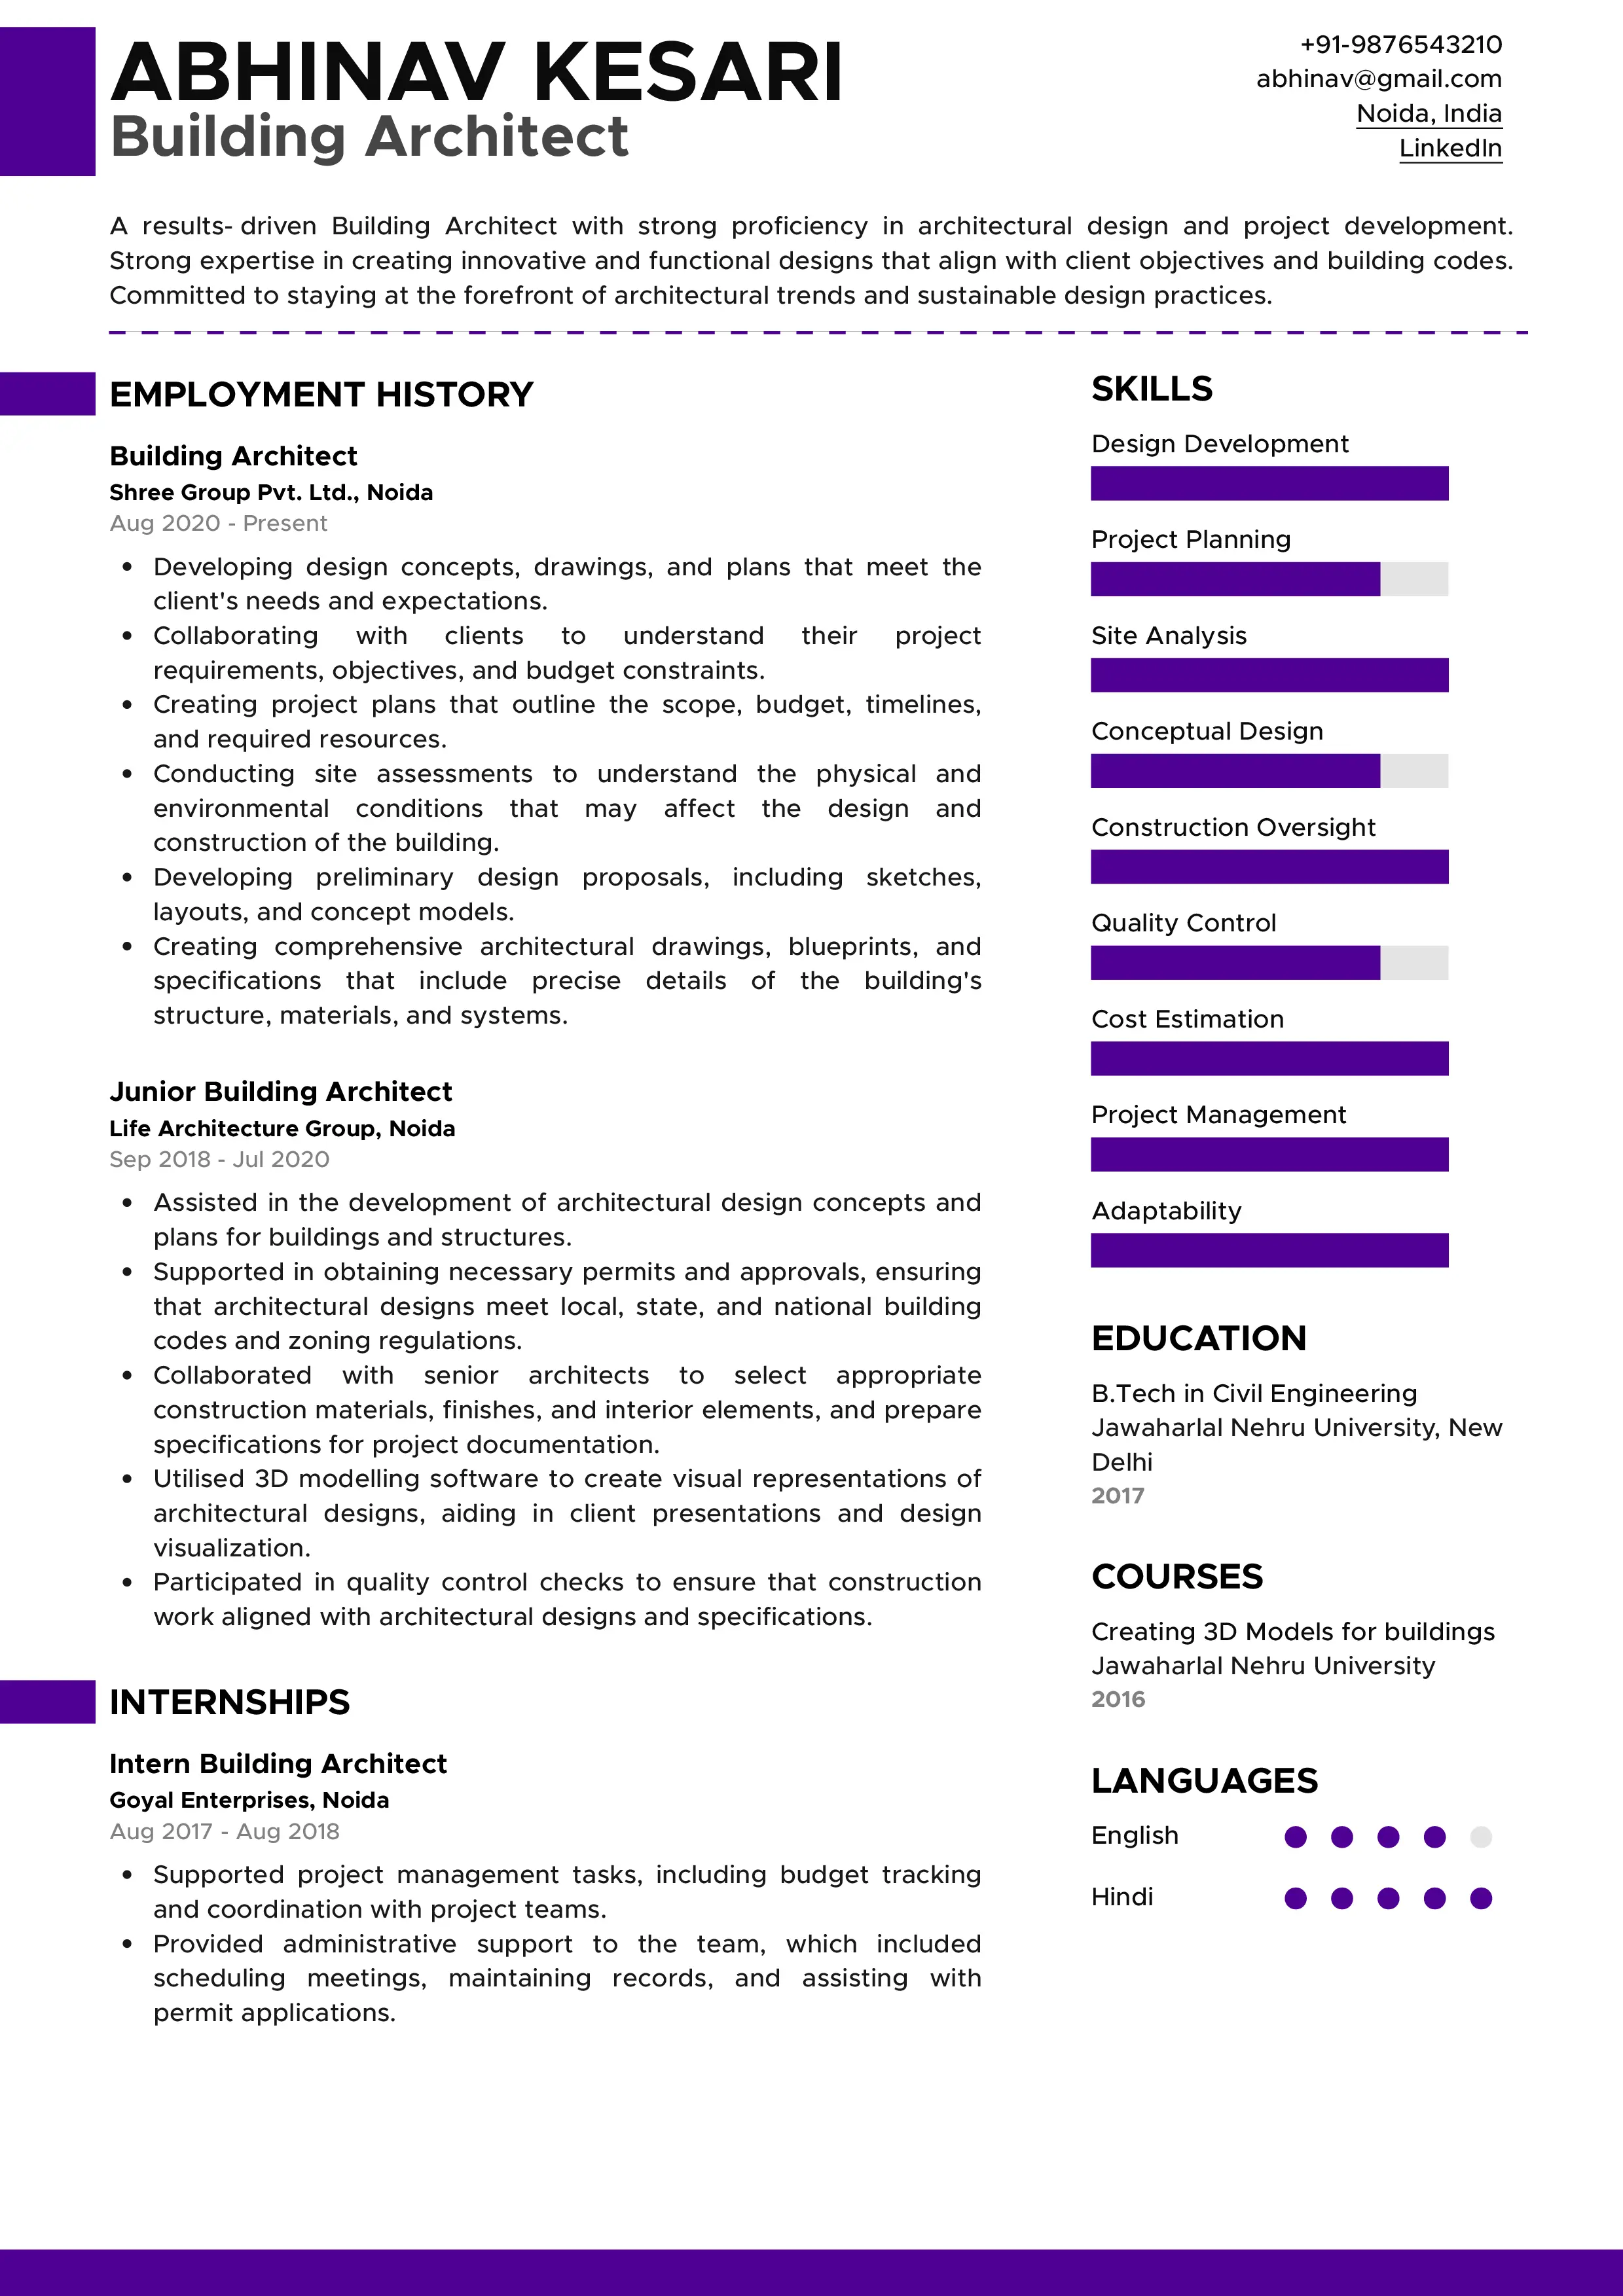 Sample Resume of Building Architect | Free Resume Templates & Samples on Resumod.co